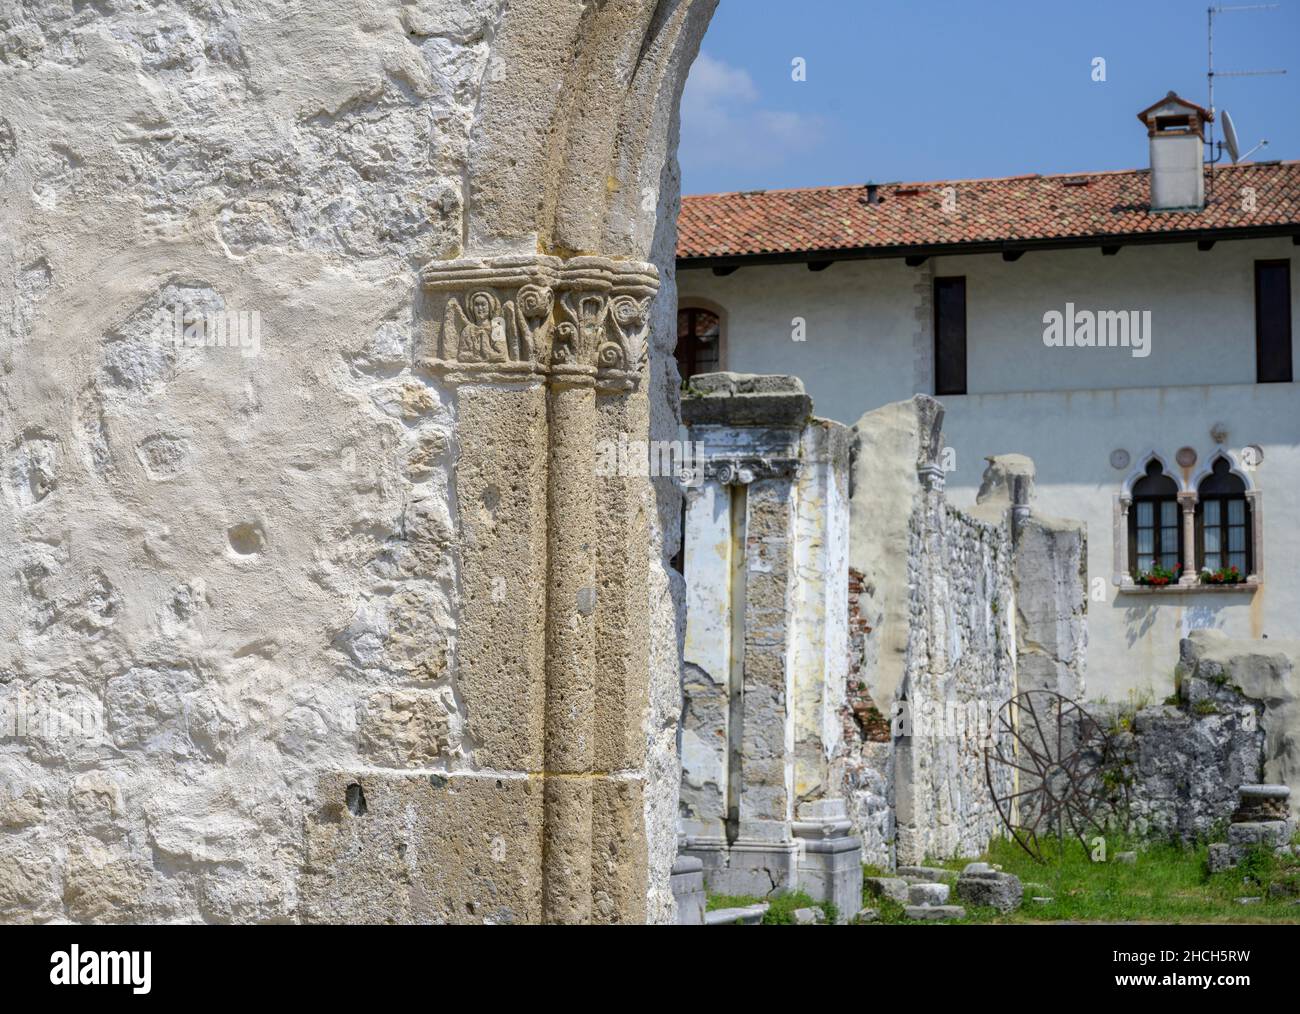 Ruins of the church that collapsed in the 1976 earthquake, Venzone, province of Udine, Italy Stock Photo